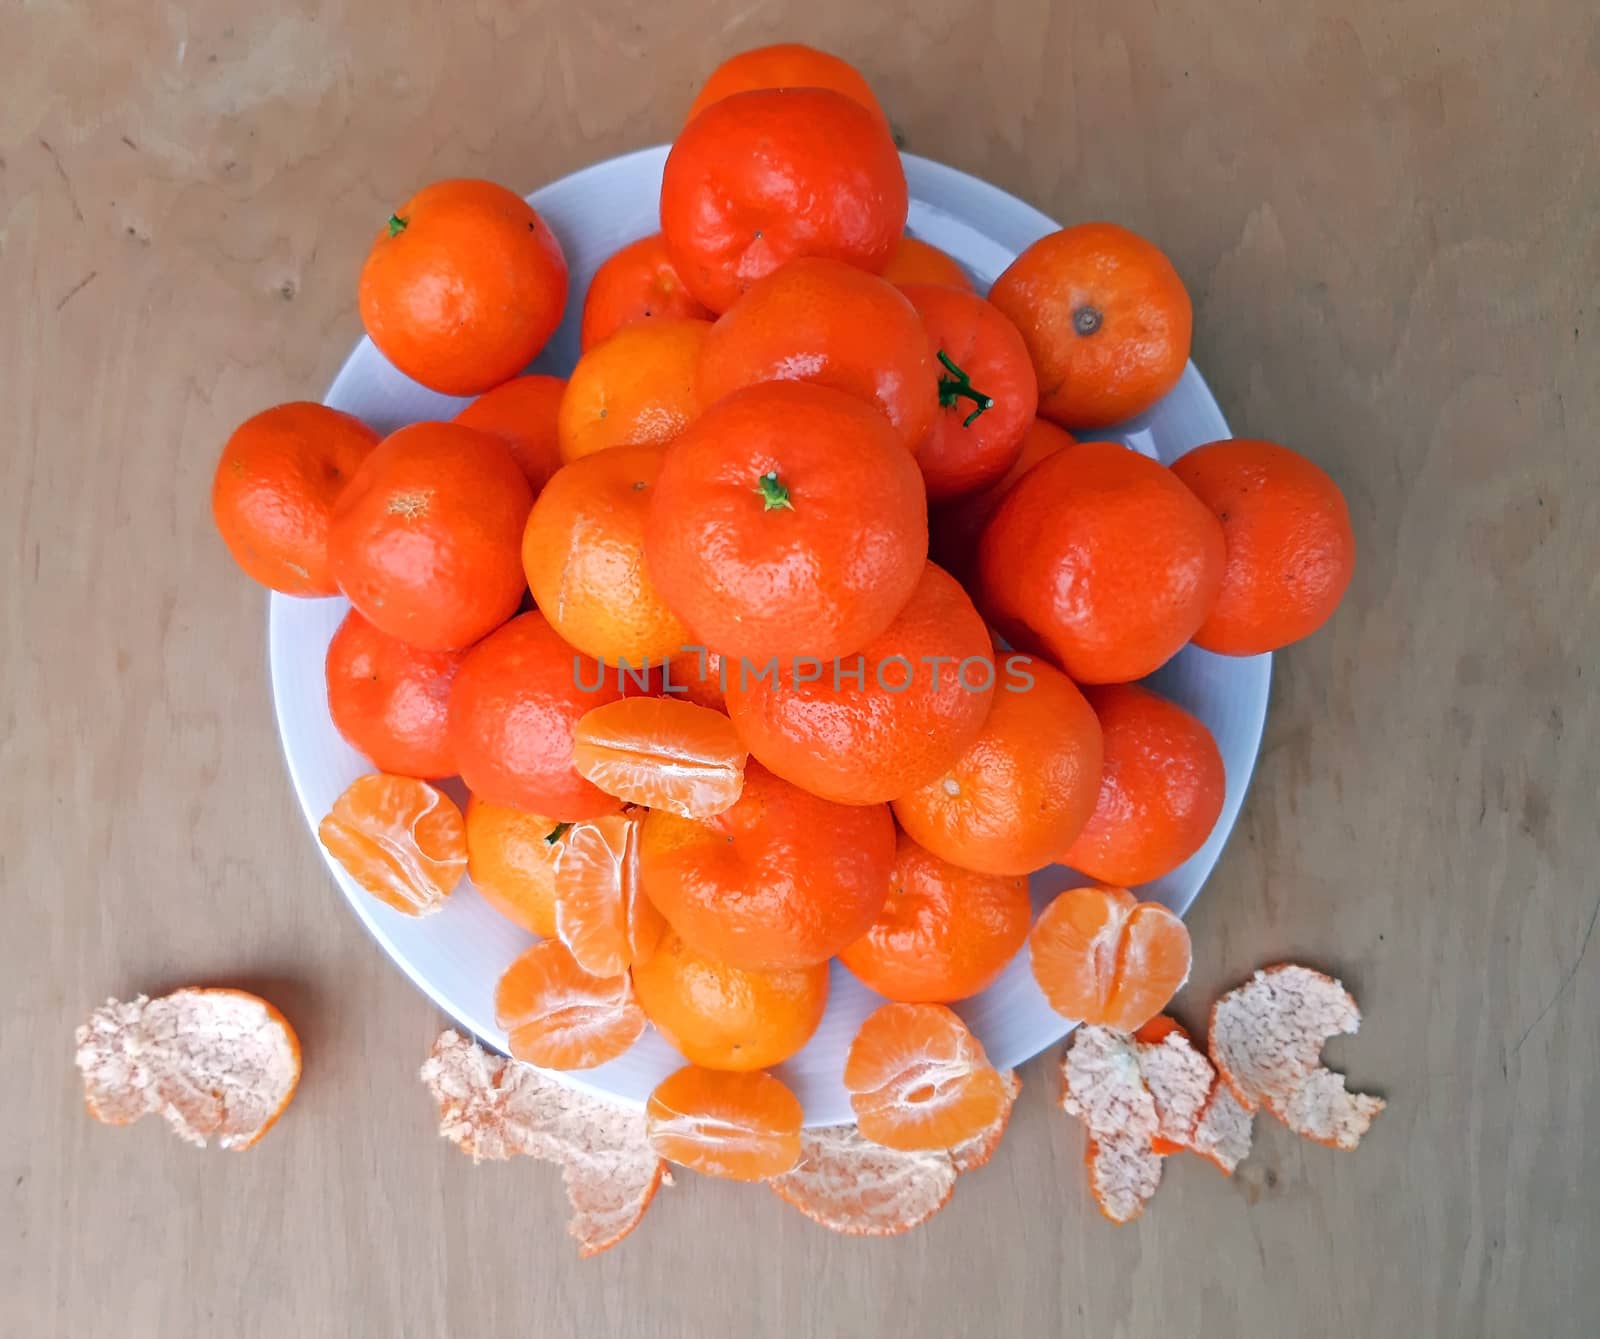 A plate full of clementines, on a wooden background